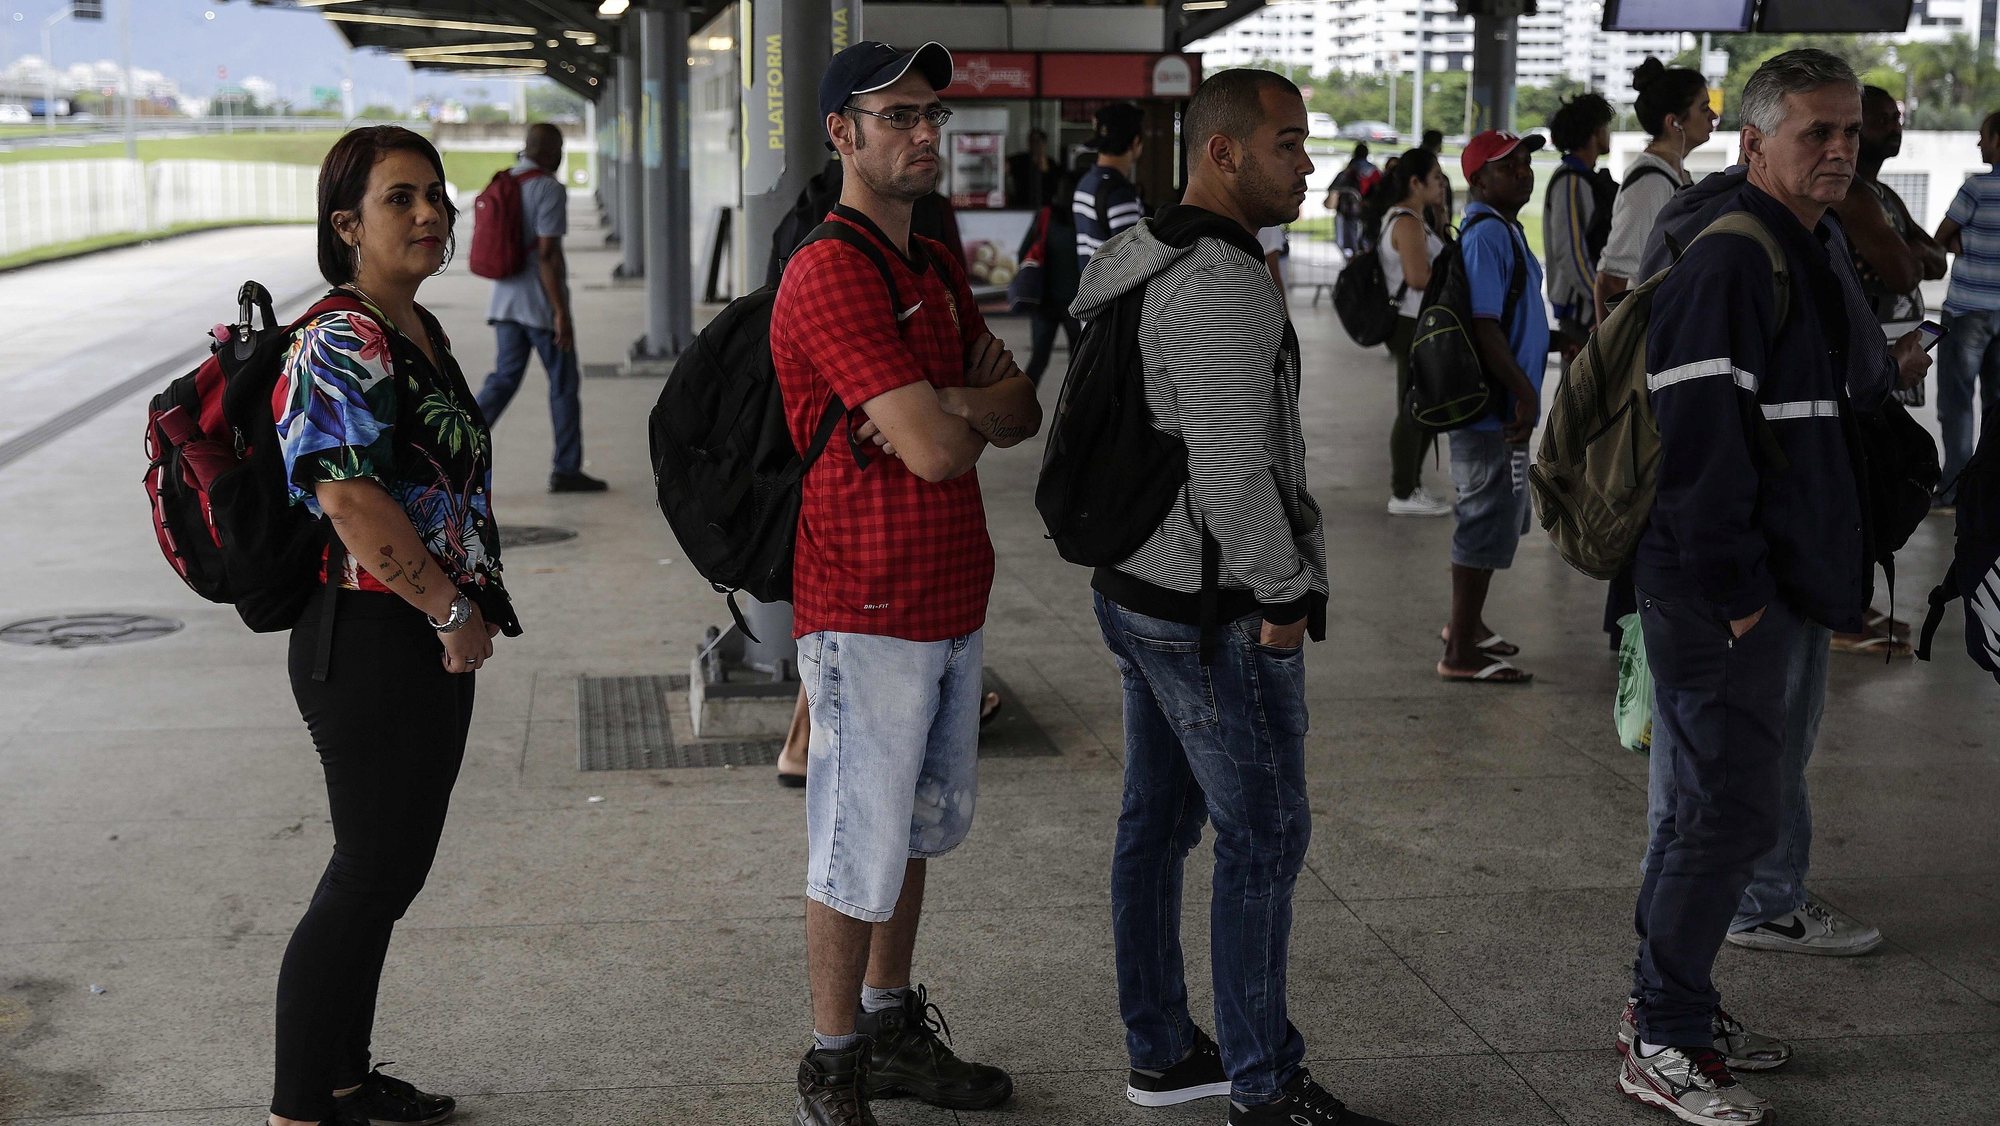 epa07922661 Brazilian teacher Isabel Vaz (L) queues up at the bus stop on her way to the school where she works in Rio de Janeiro, Brazil, 10 October 2019 (issued 15 October 2019). Isabel, 42, takes up to three buses and a train to travel 100 kilometers to work each day, one of the various drawbacks of teaching in Brazil, a job that is poorly paid and fraught with danger.  EPA/ANTONIO LACERDA  ATTENTION: This Image is part of a PHOTO SET